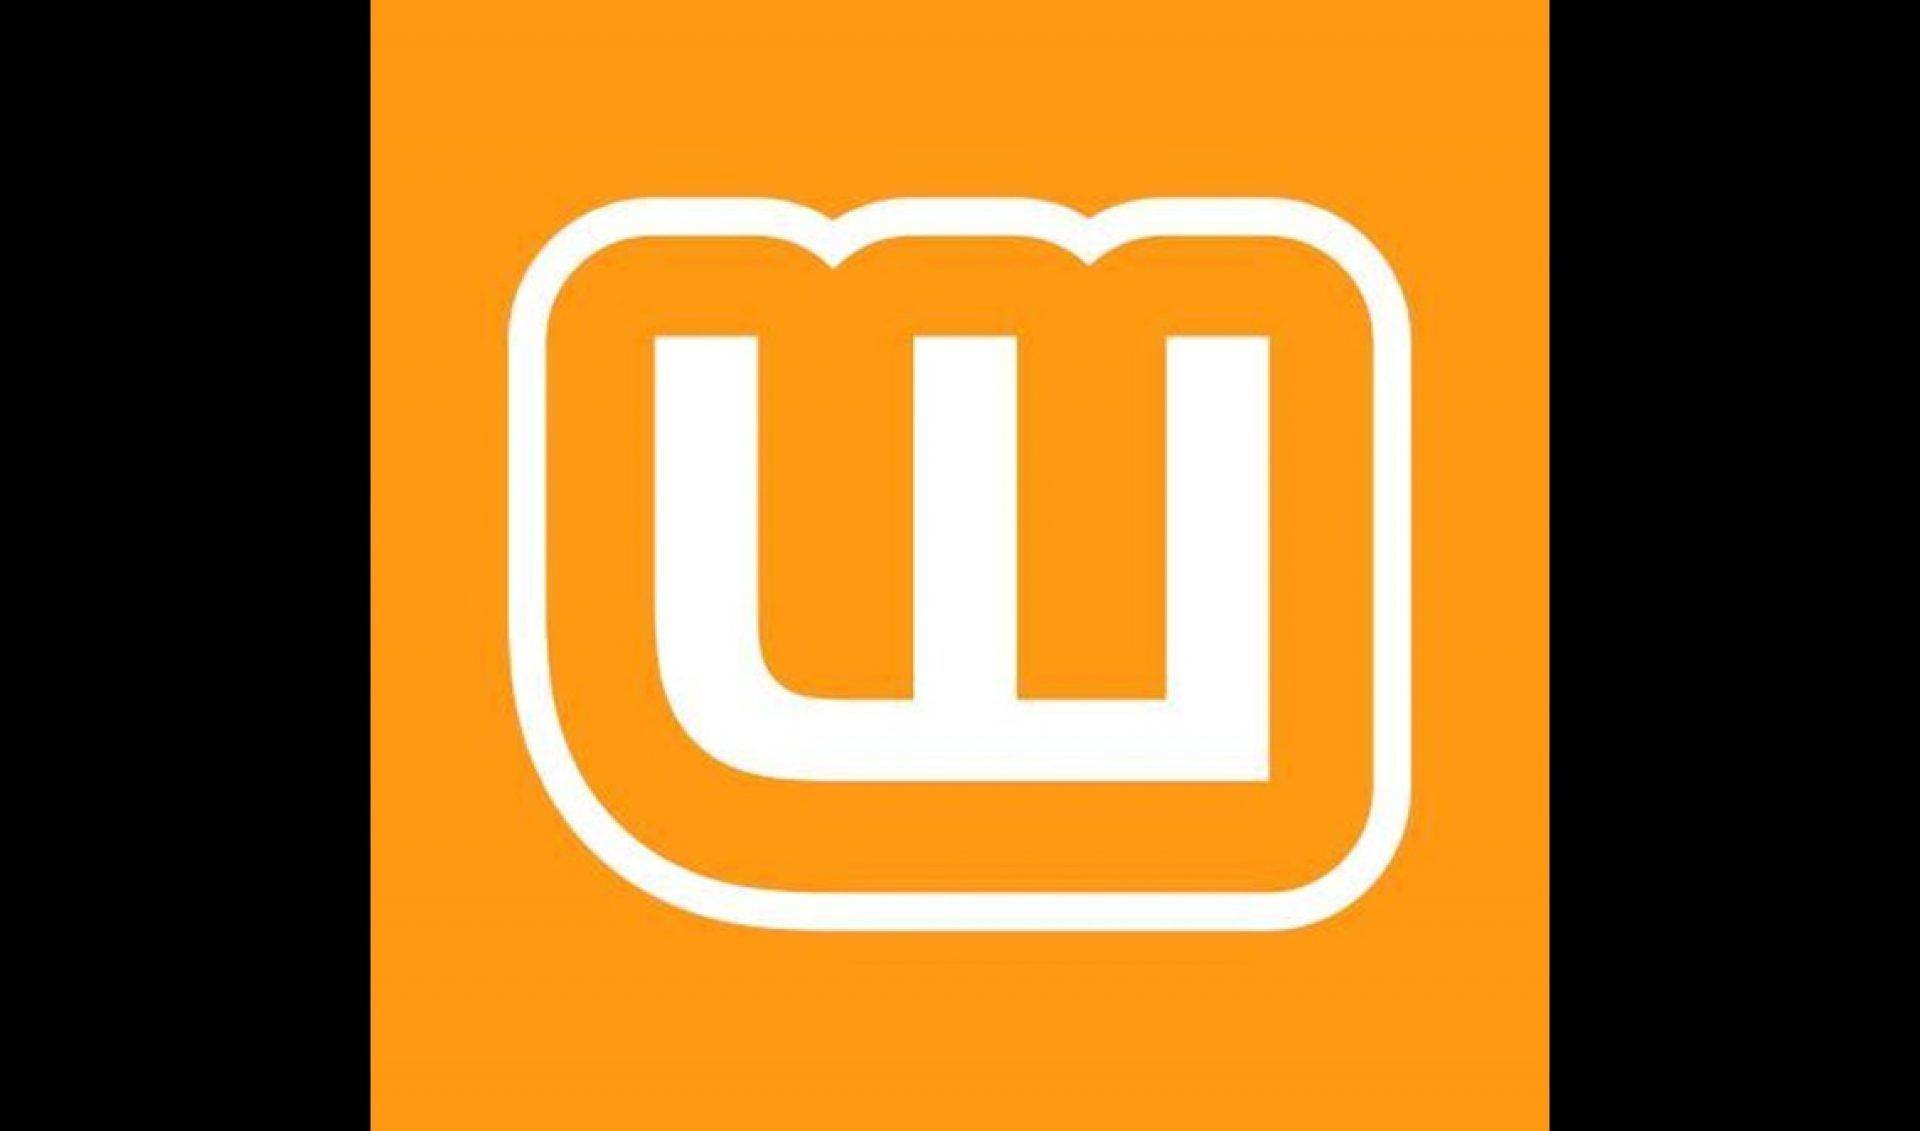 Wattpad Launches Digital Studio To Manage Its Writers Like A Multi-Channel Network